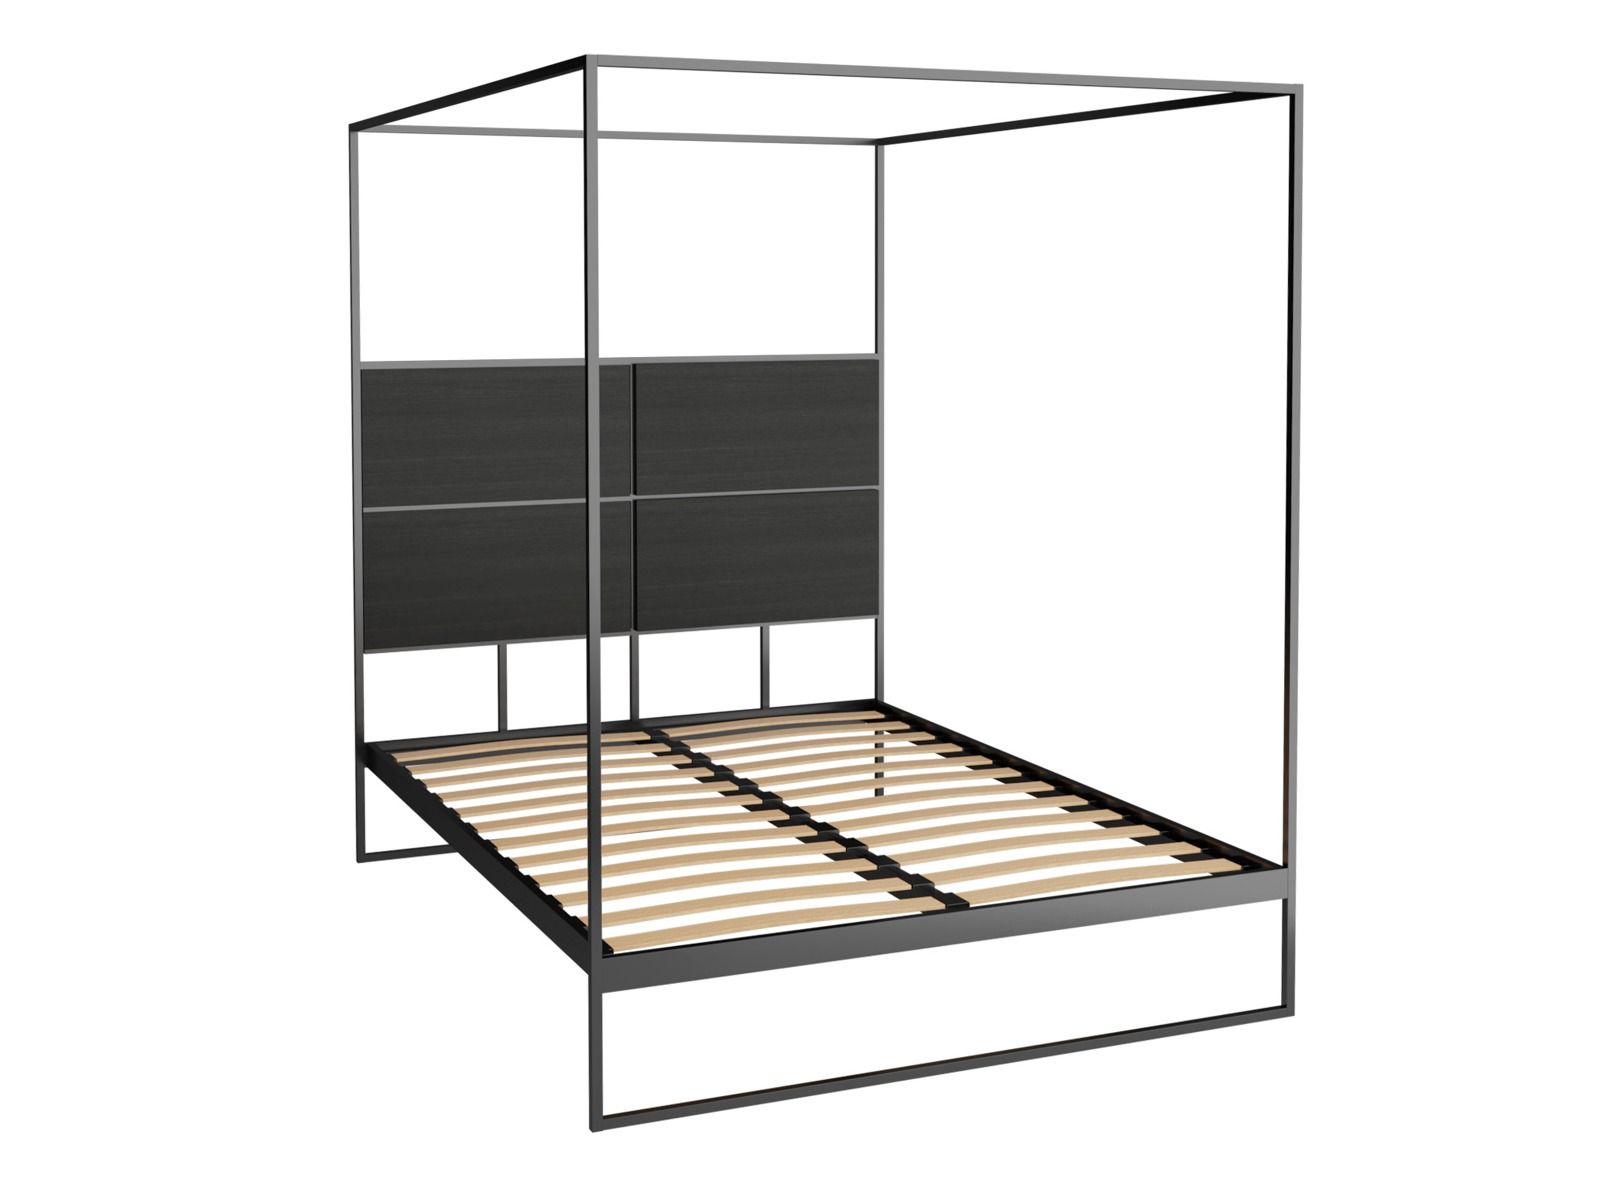 King Canopy Bed Collection From Gillmore, Black King Canopy Bed